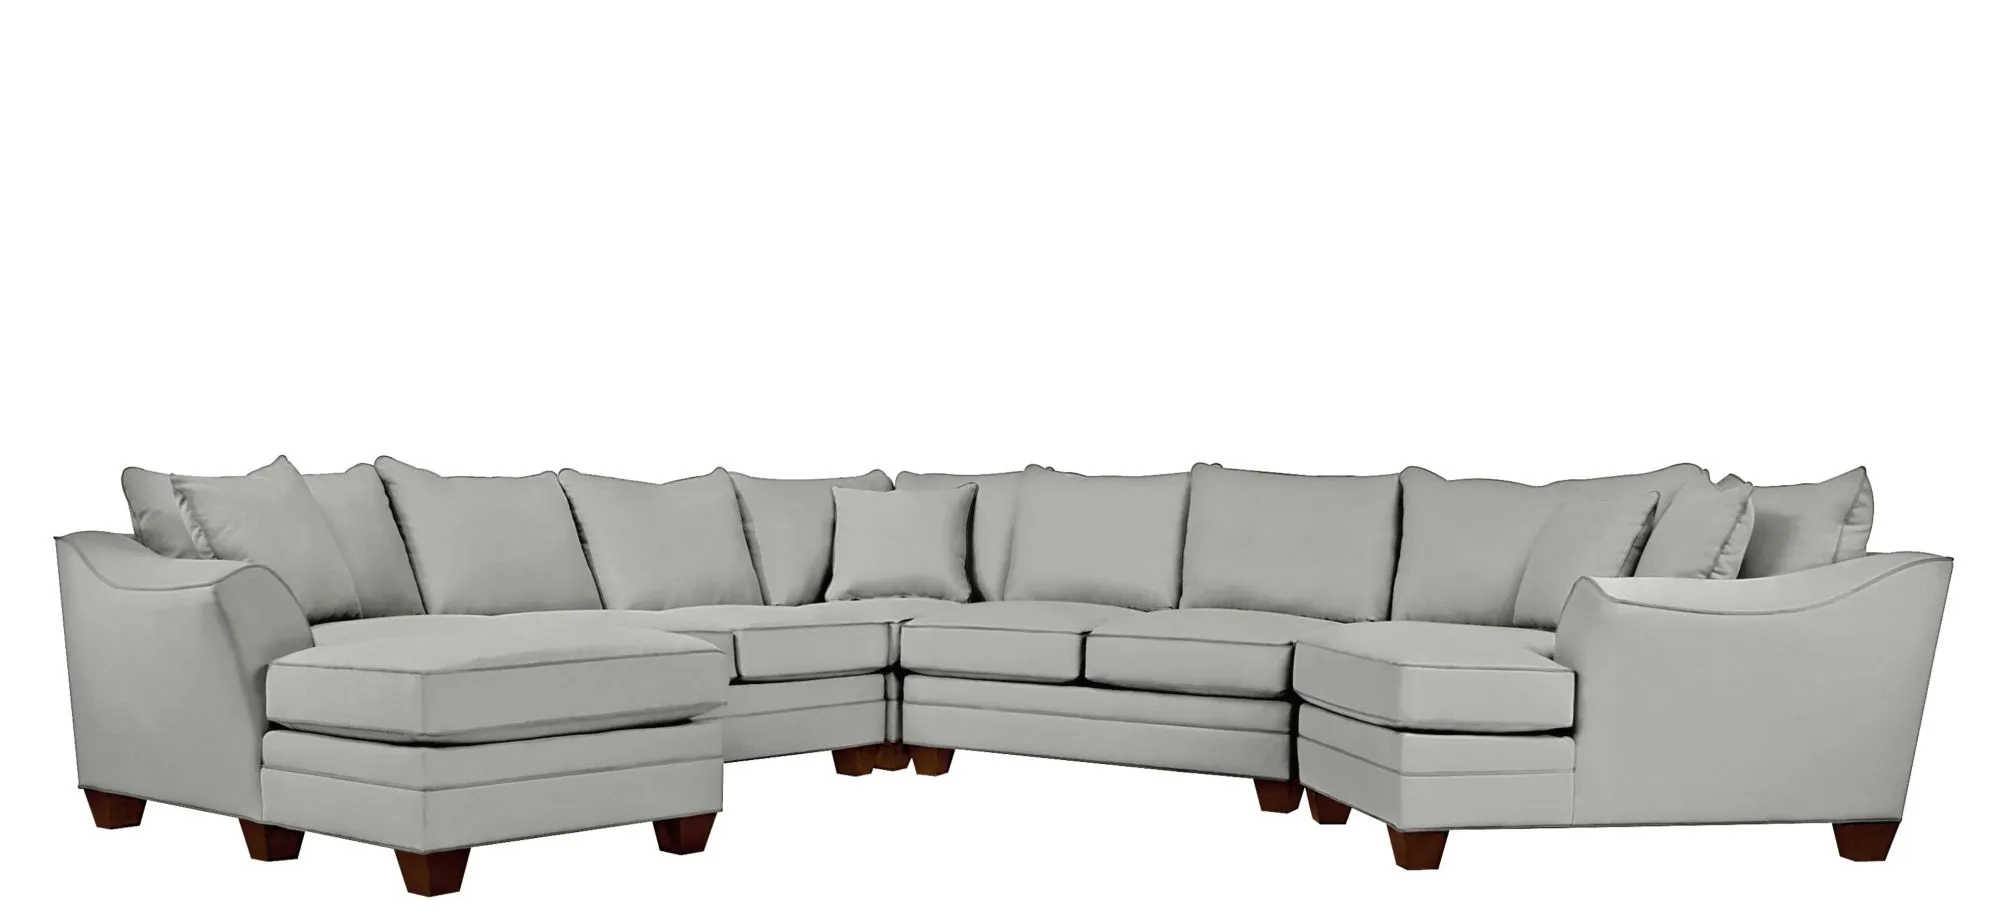 Foresthill 5-pc. Left Hand Facing Sectional Sofa in Suede So Soft Platinum by H.M. Richards